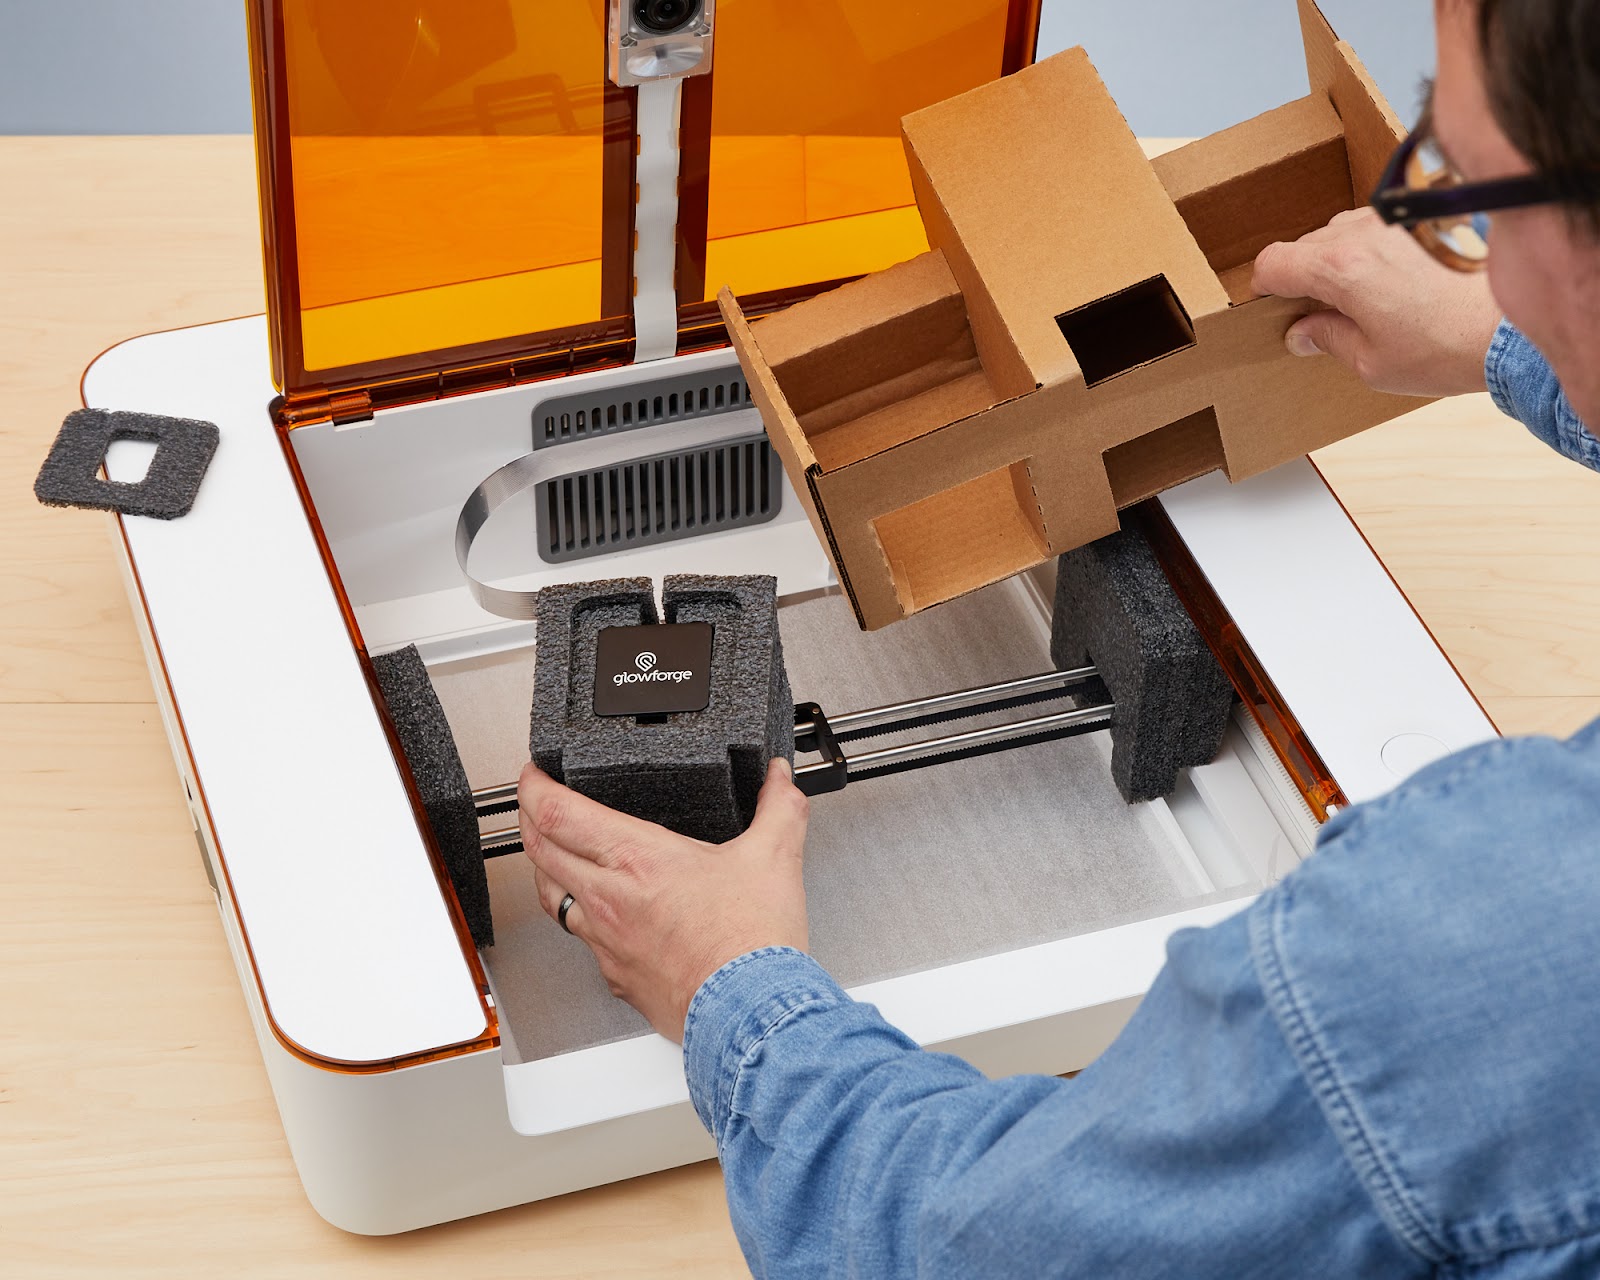 Action shot; laser head foam block being held and lifted from the cardboard holder.jpg